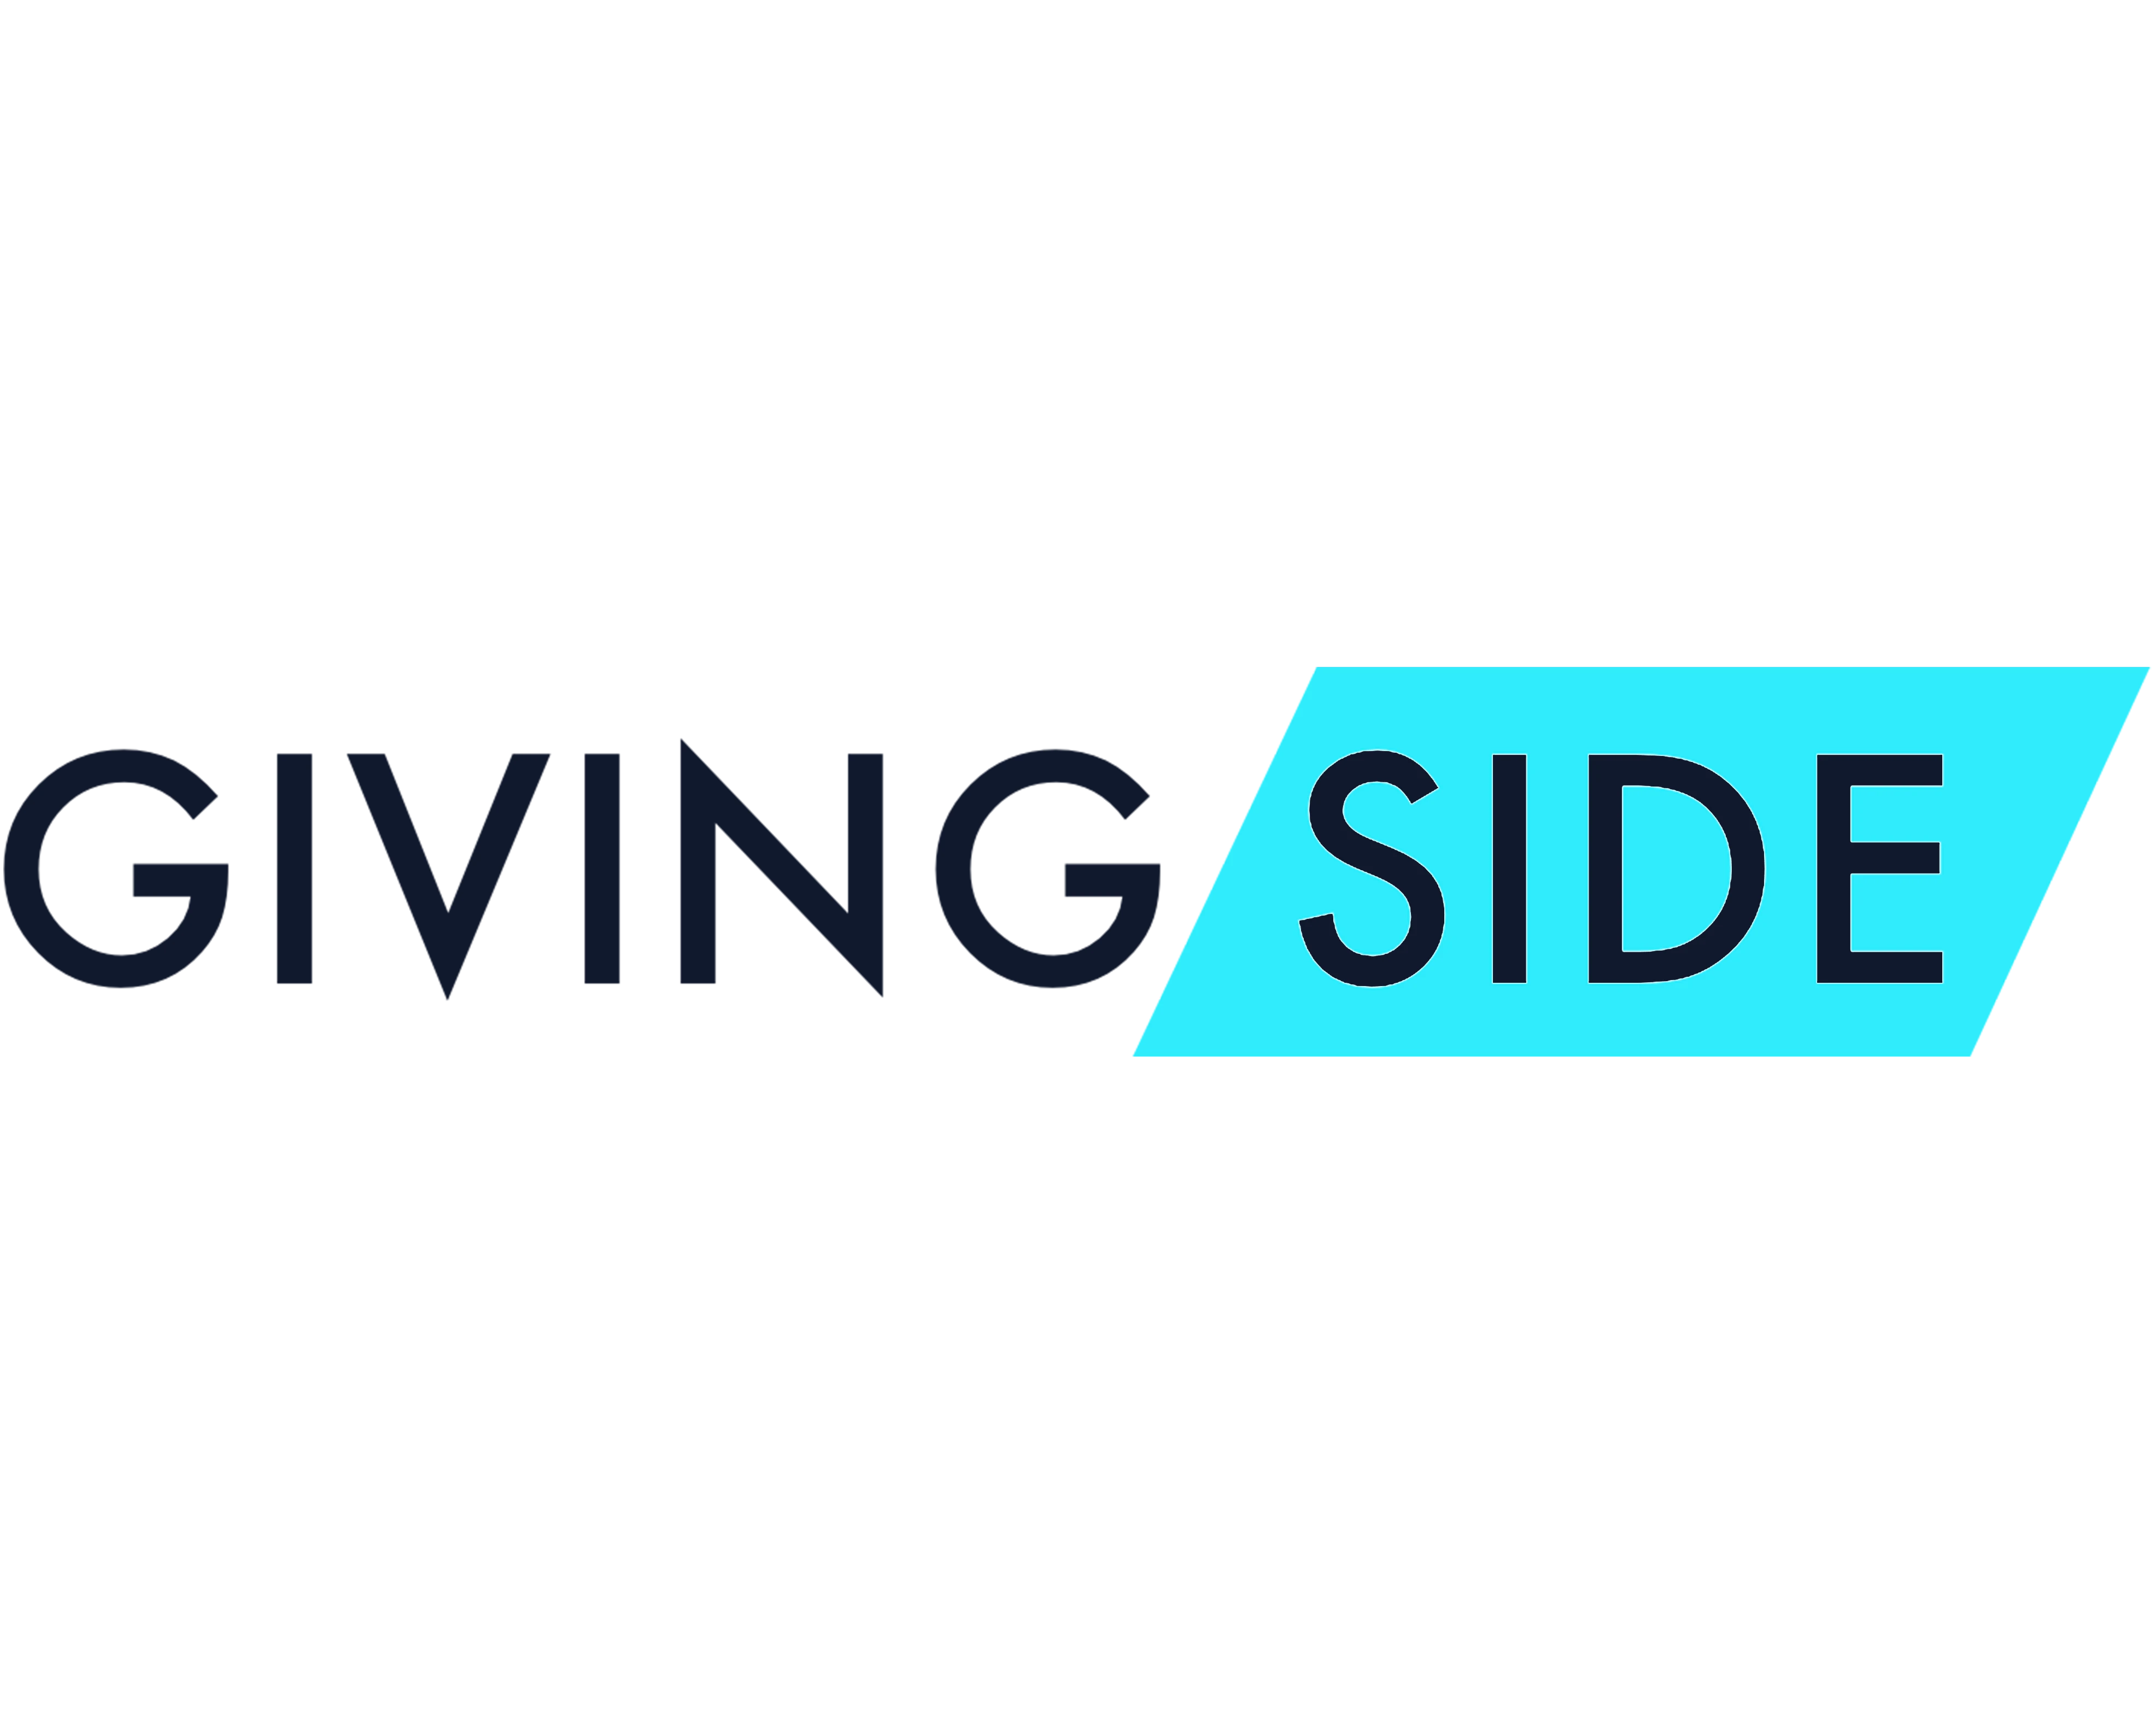 giving side